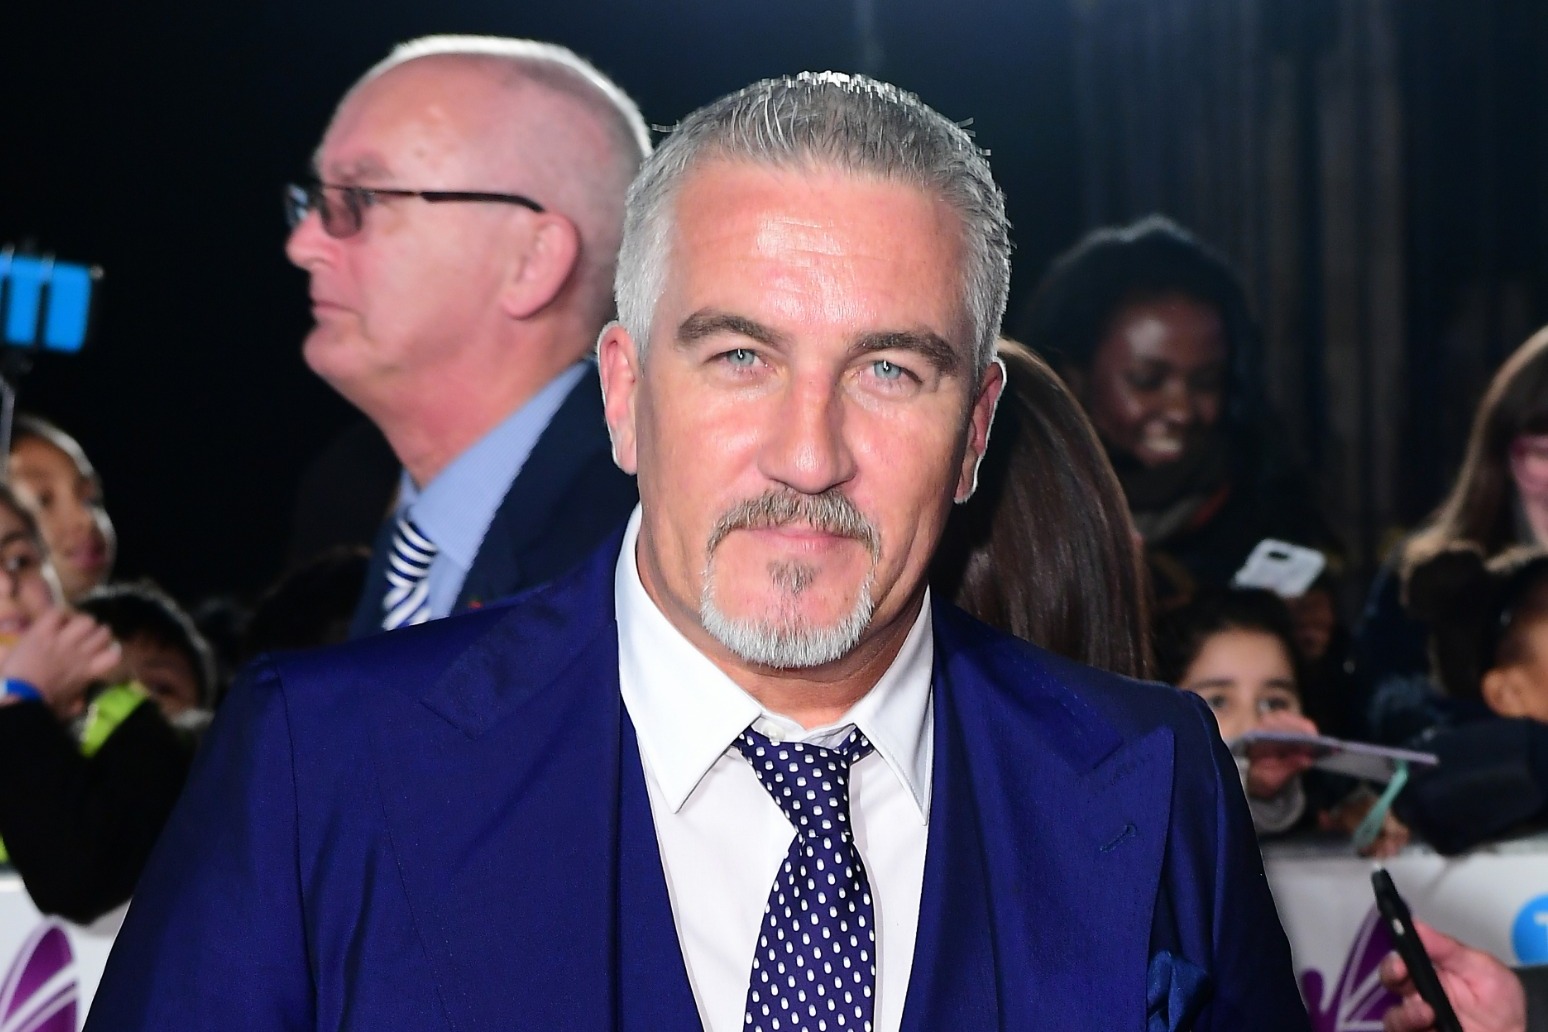 Paul Hollywood reflects on the horrendous side of fame